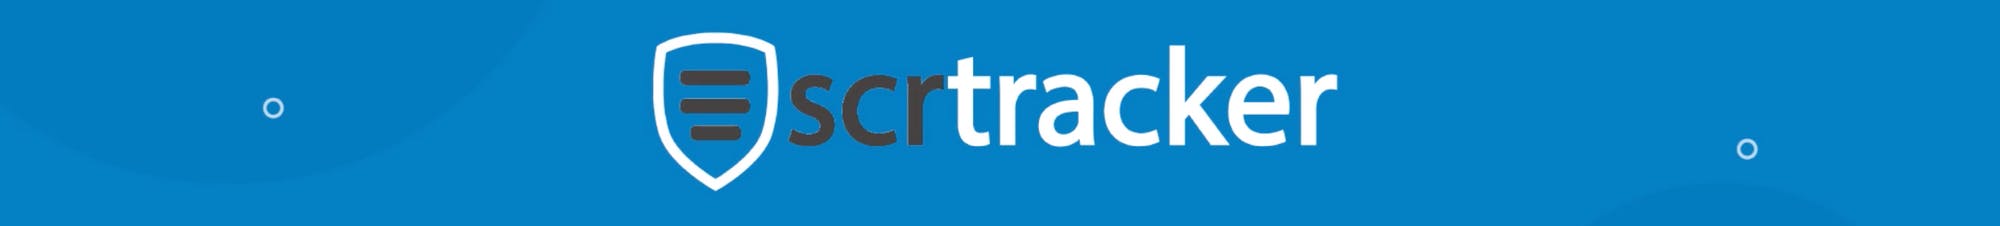 SCR Tracker single central record online software to manage and track your school trust institution vetting checks recruitment procedure process HR school business manager compliance audit Ofsted inspection pass volunteers governor profiles staff members existing new hire starters leavers excel replacement replace spreadsheet